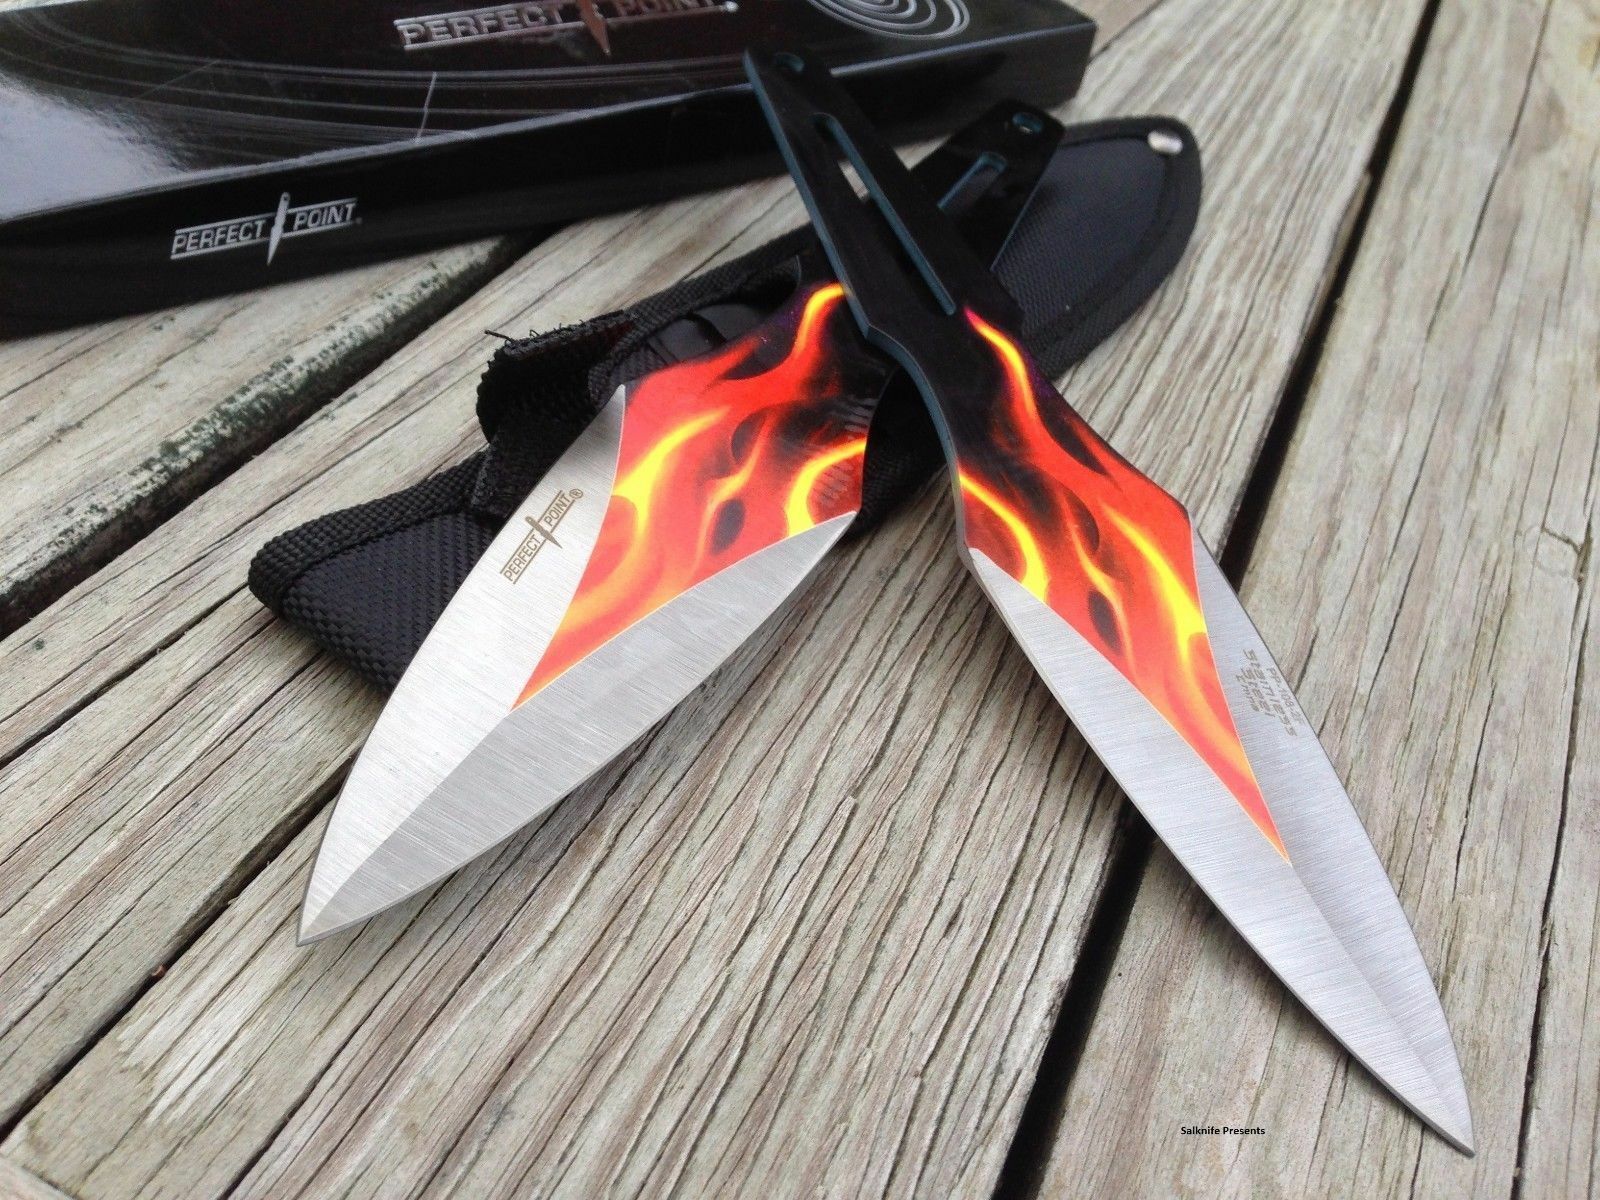 Perfect Point Fantasy Throwing Knives Flame Graphic Design Sale